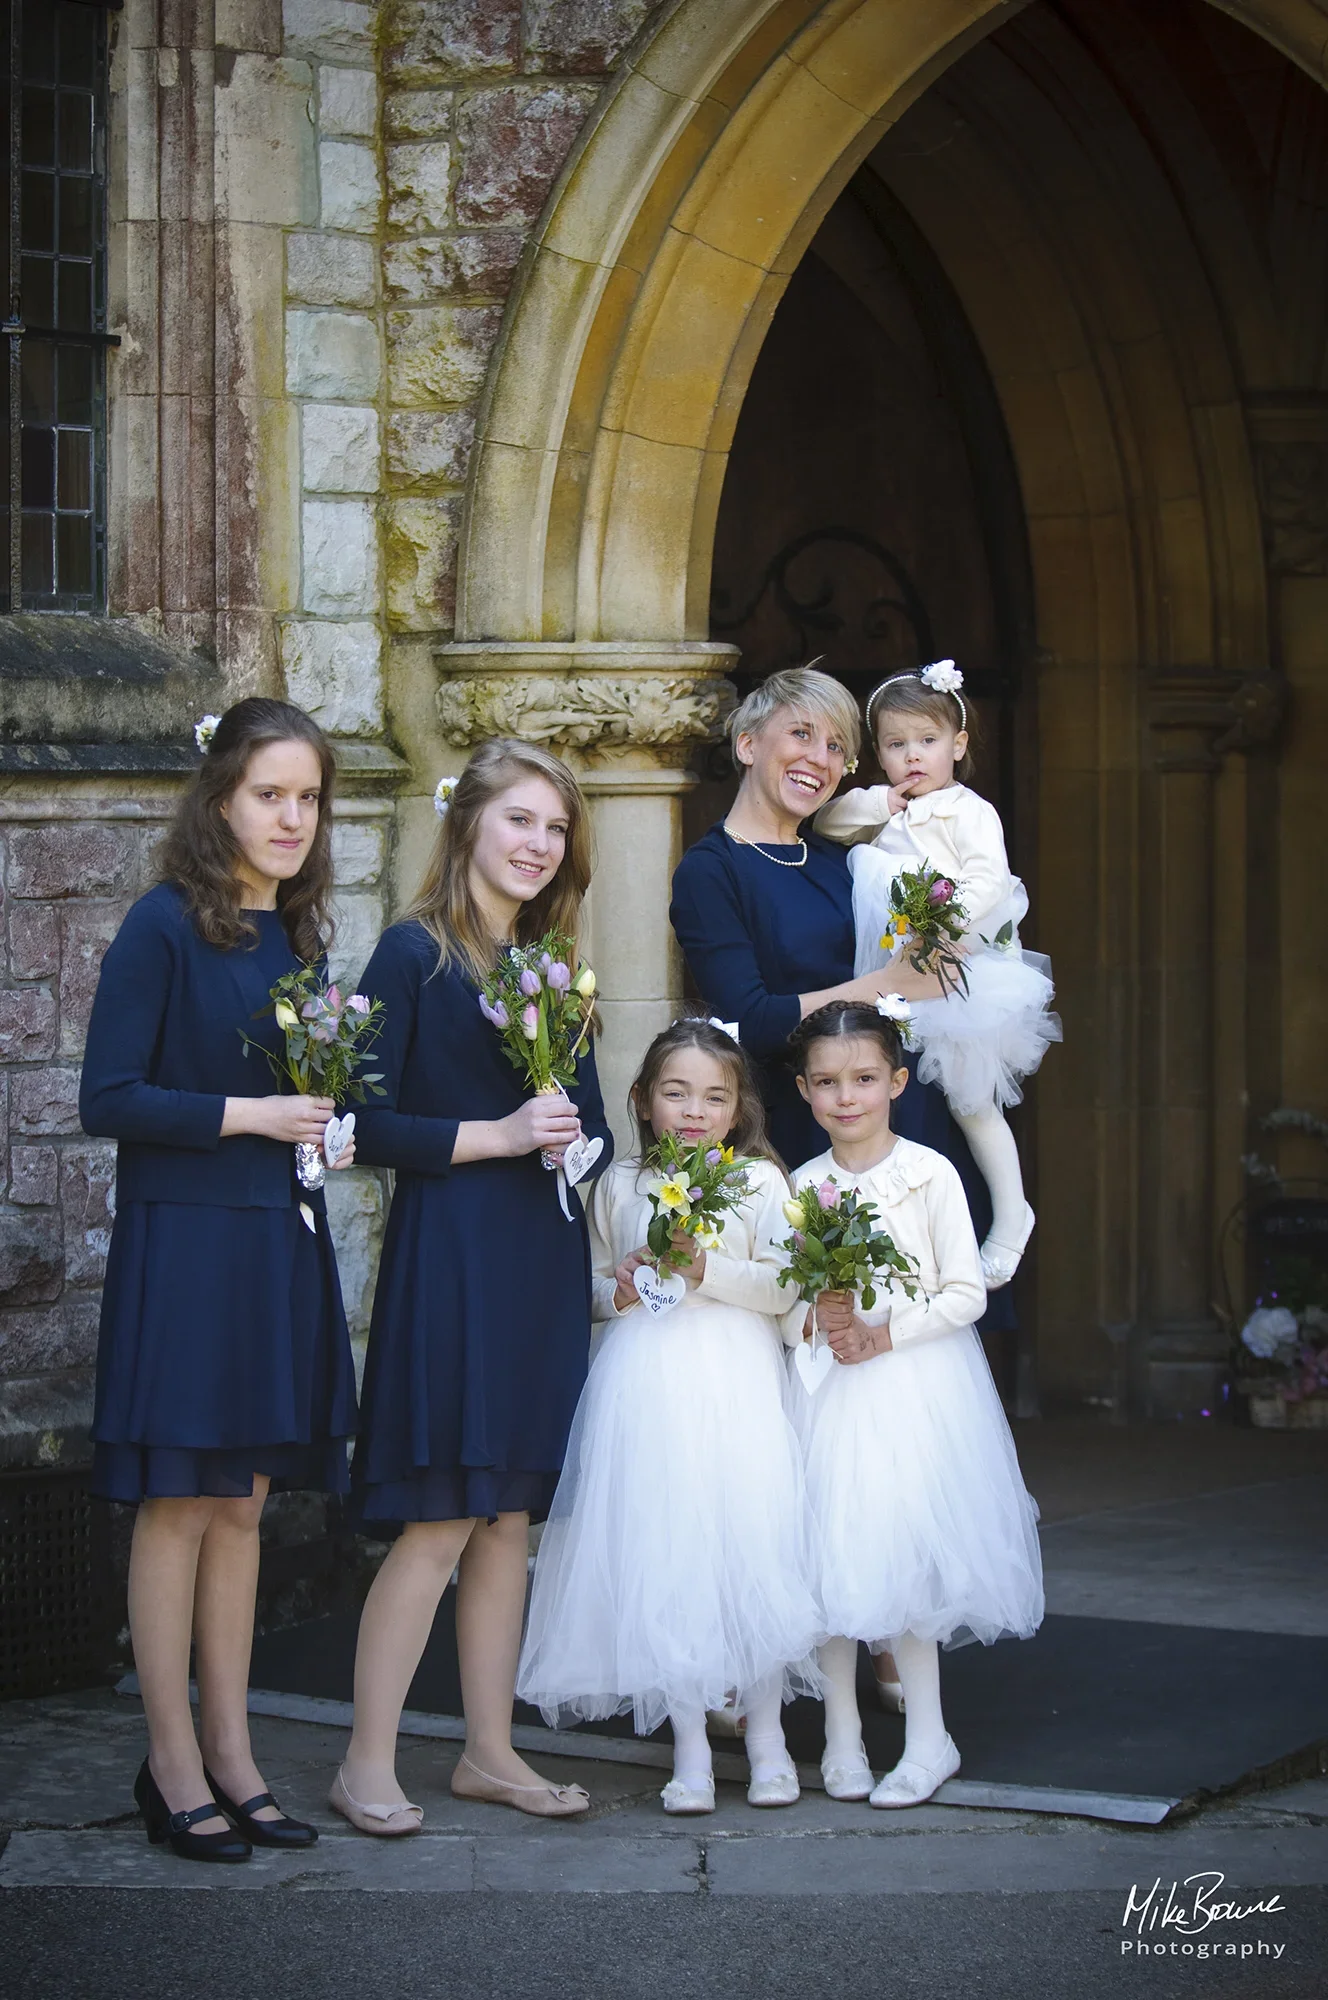 Bridesmaids i blue dresses with small flower girls in white dresses in the church doorway